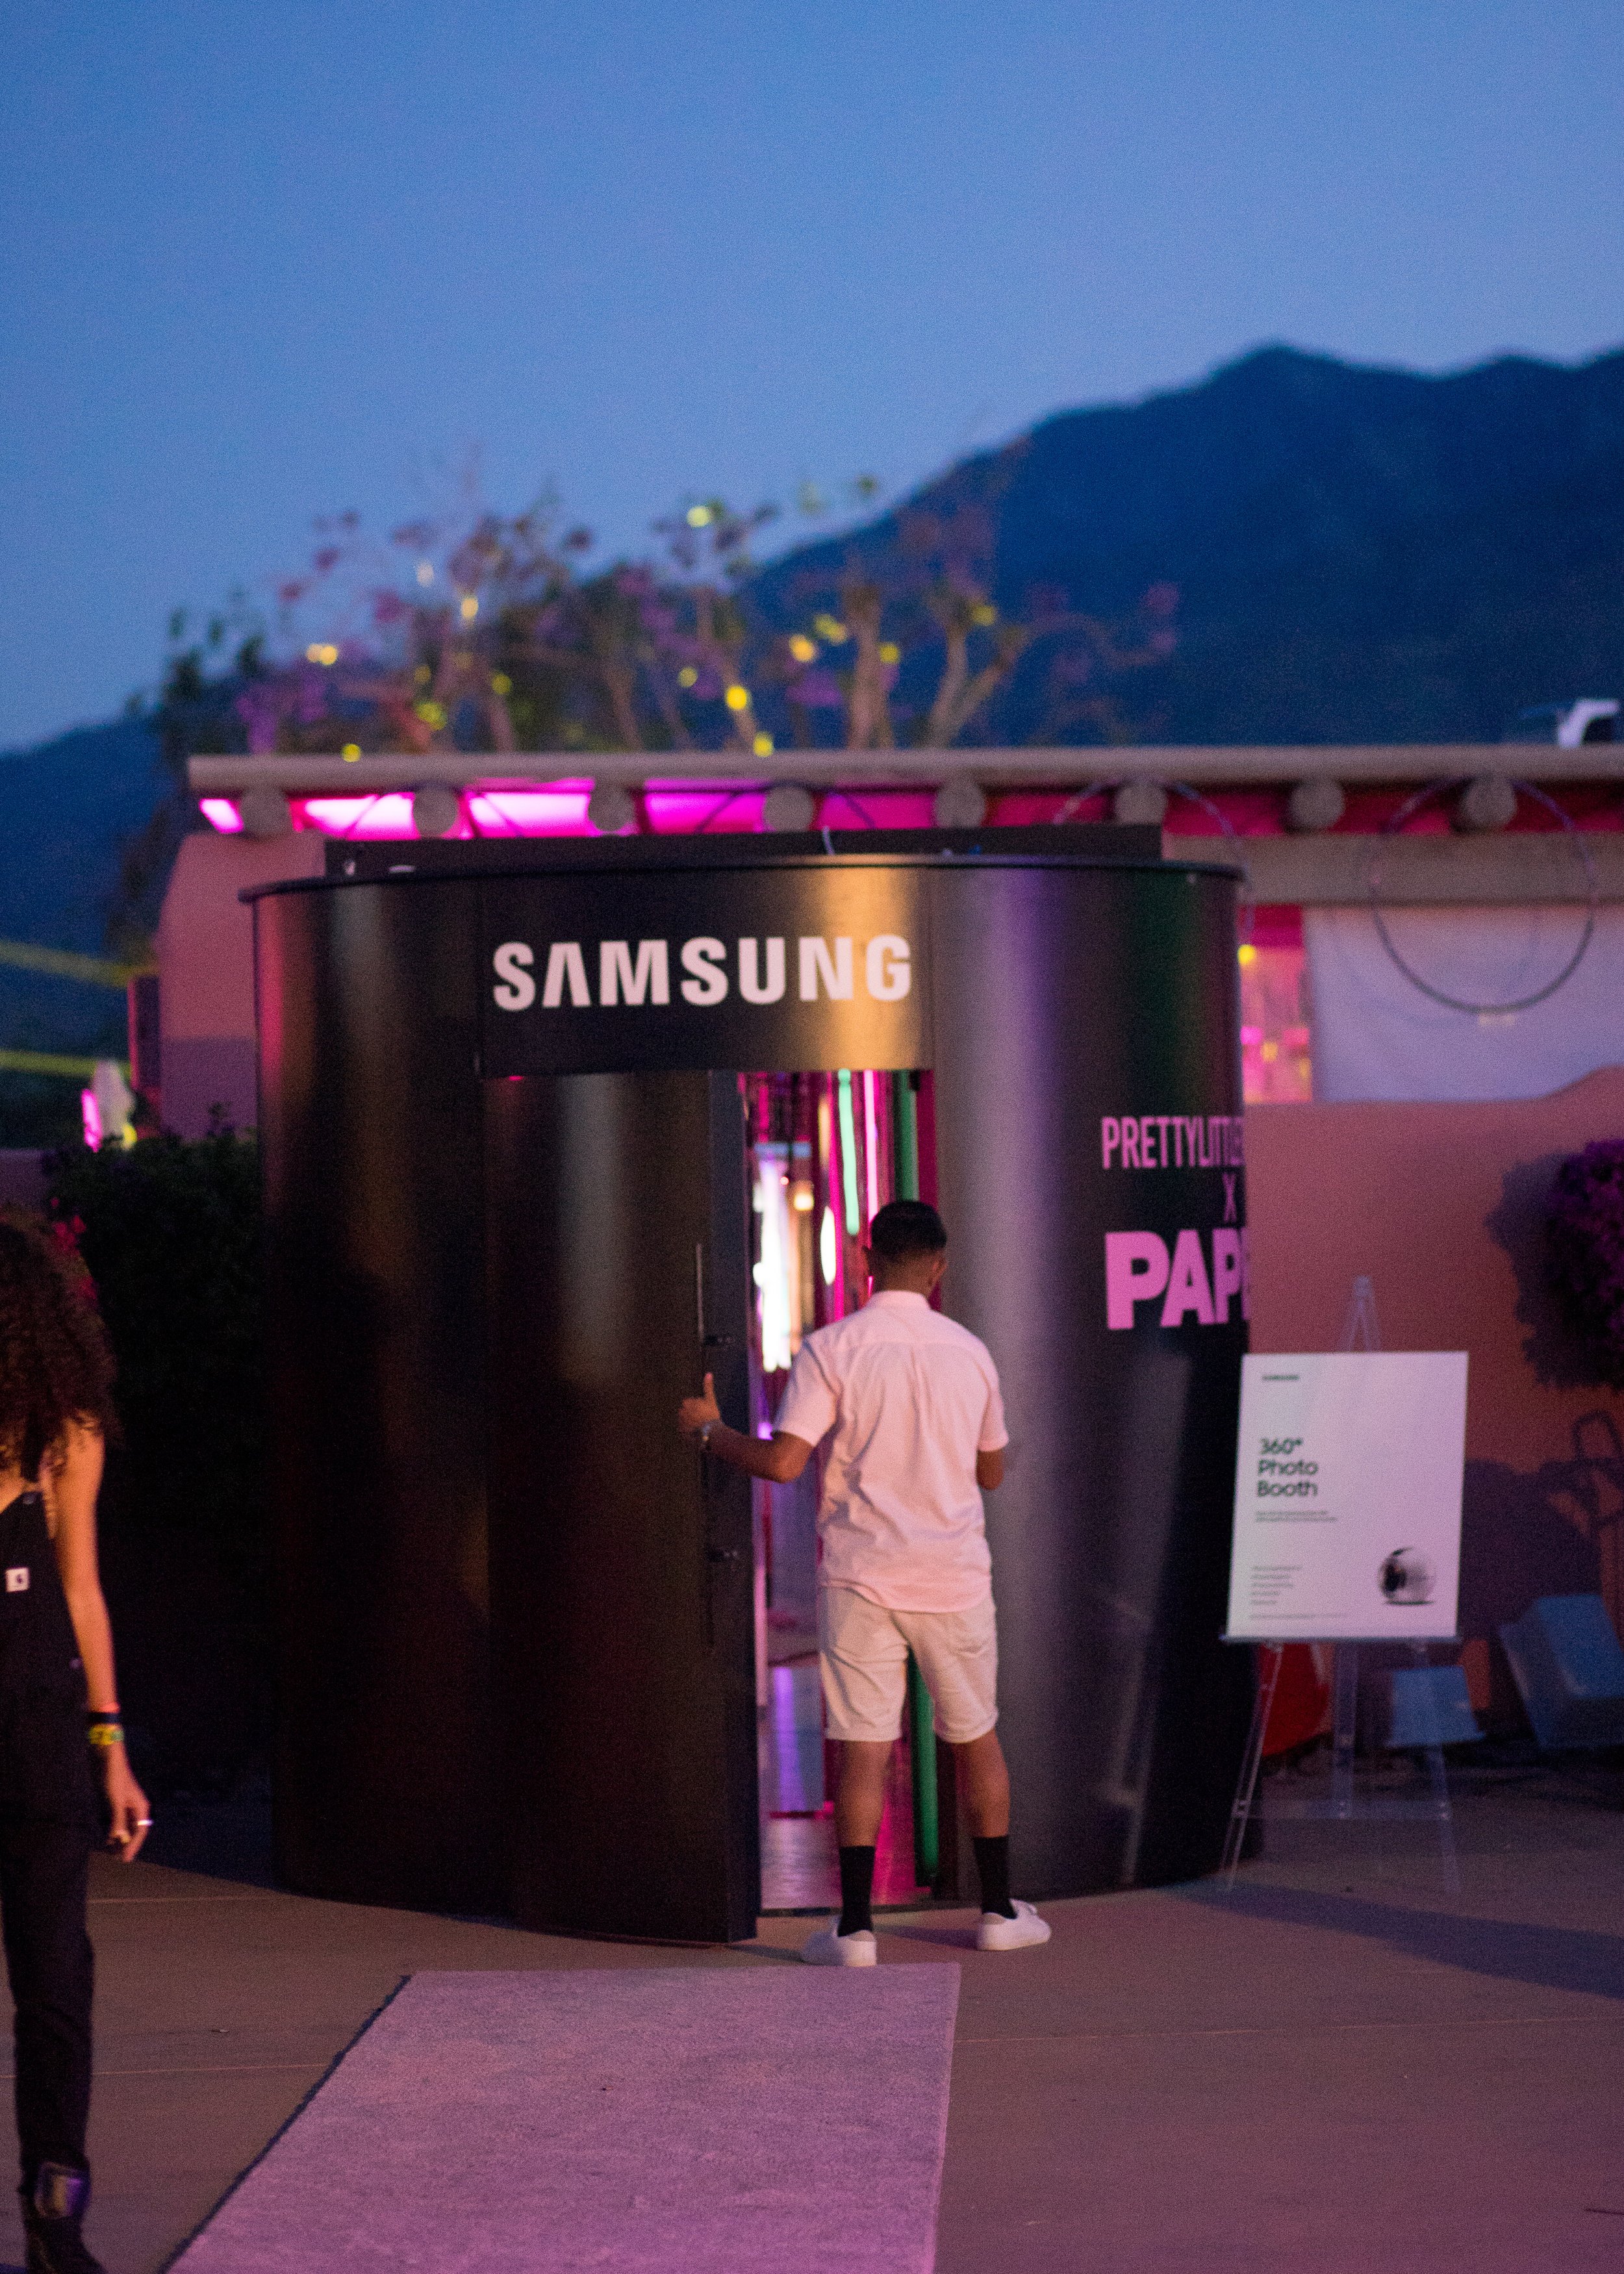 Ultimate Hollywood Coachella Poolside Party samsung booth at night.jpg